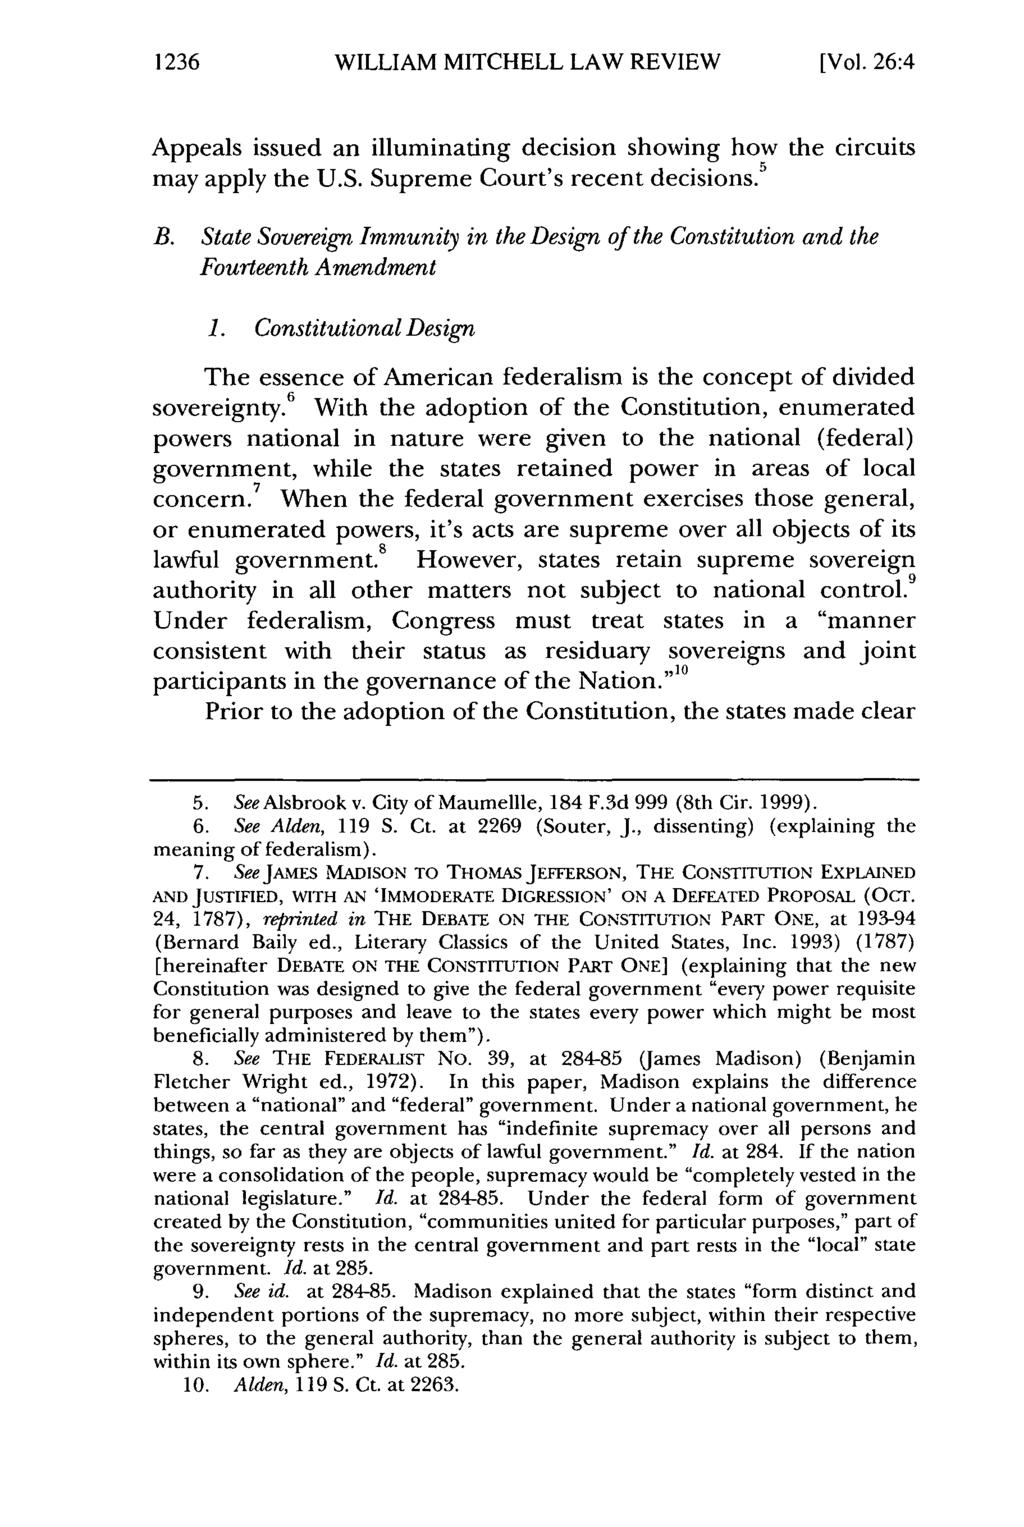 1236 William WILLIAM Mitchell Law MITCHELL Review, Vol. 26, LAW Iss. 4 [2000], REVIEW Art. 12 [Vol. 26:4 Appeals issued an illuminating decision showing how the circuits may apply the U.S.